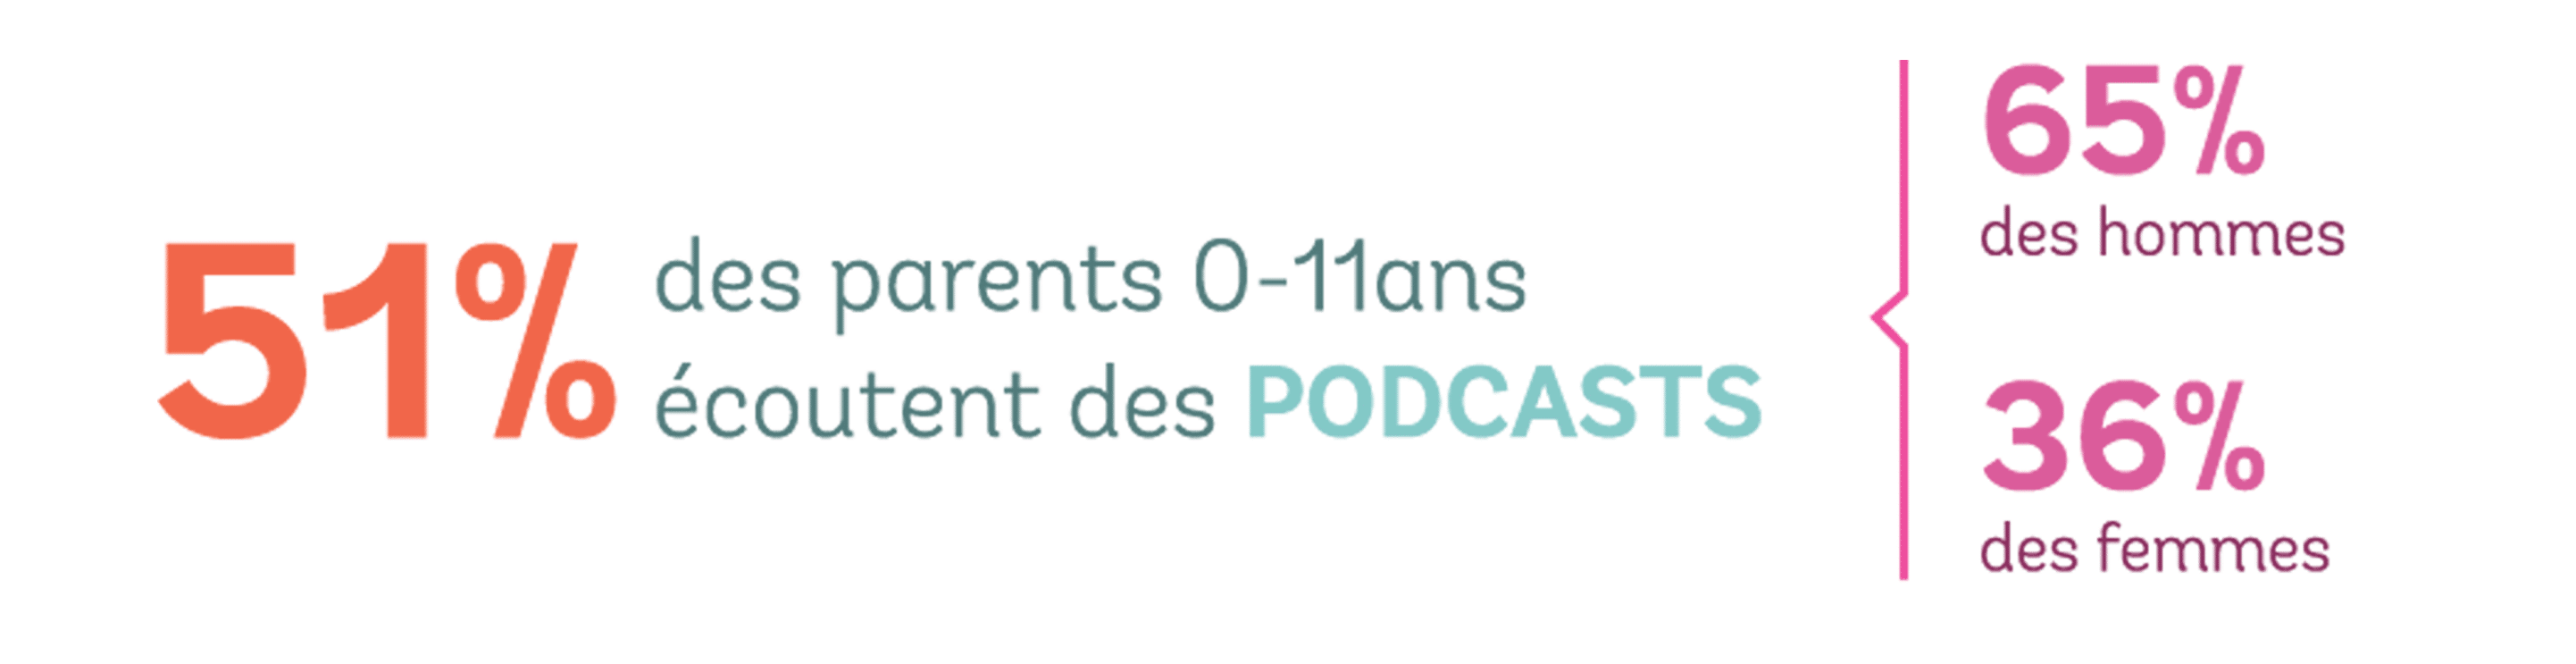 parents-écoute-podcasts